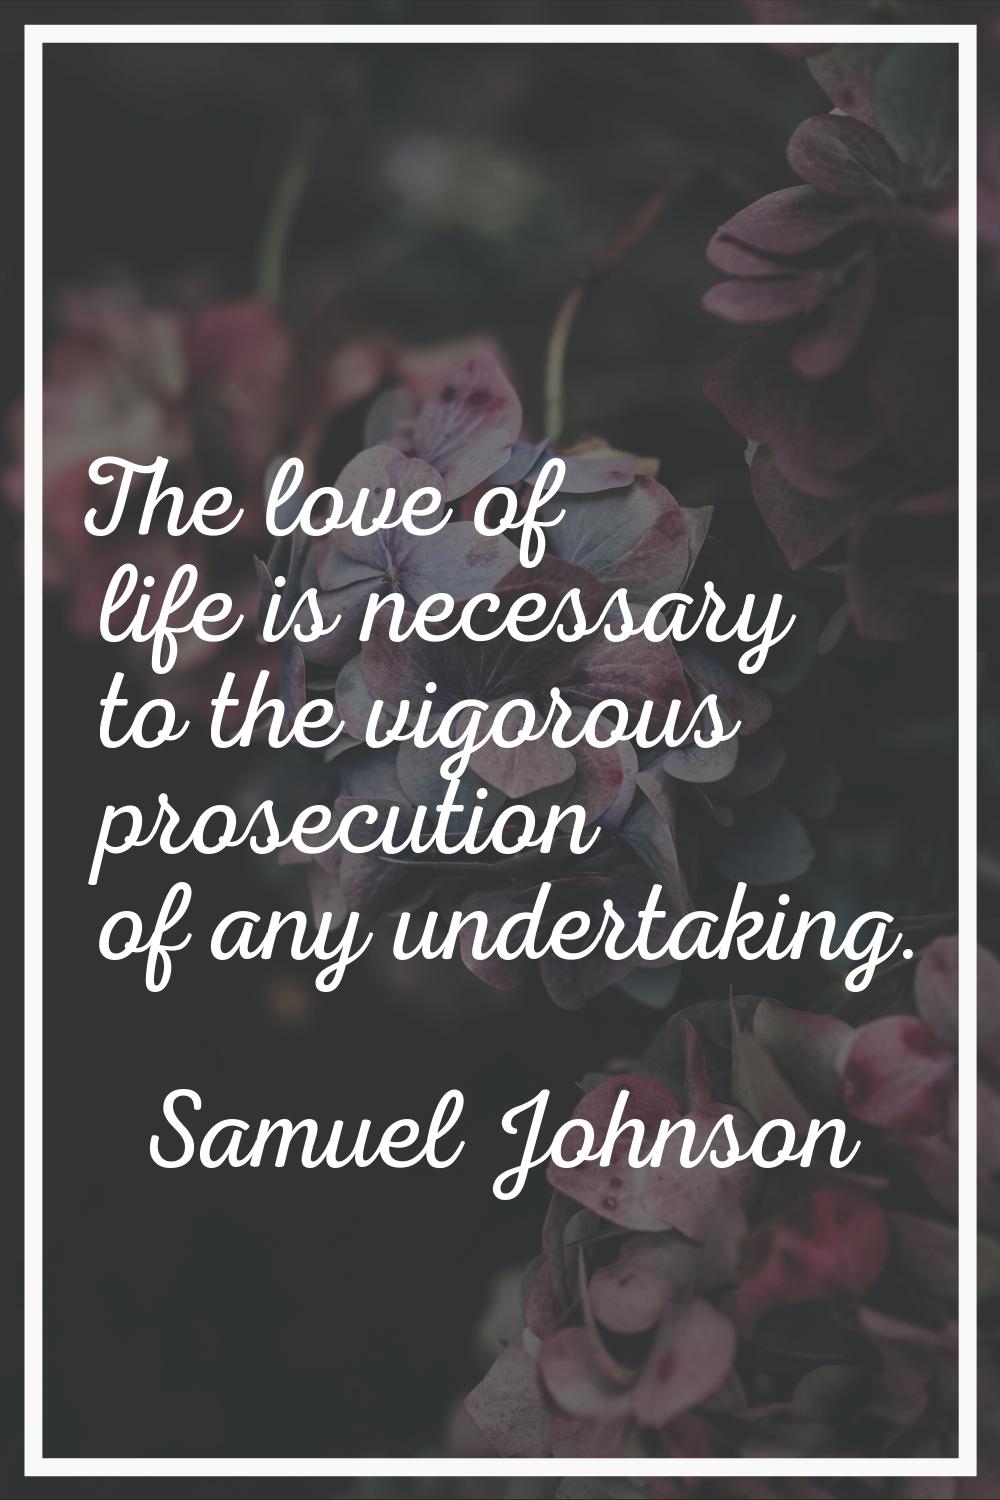 The love of life is necessary to the vigorous prosecution of any undertaking.